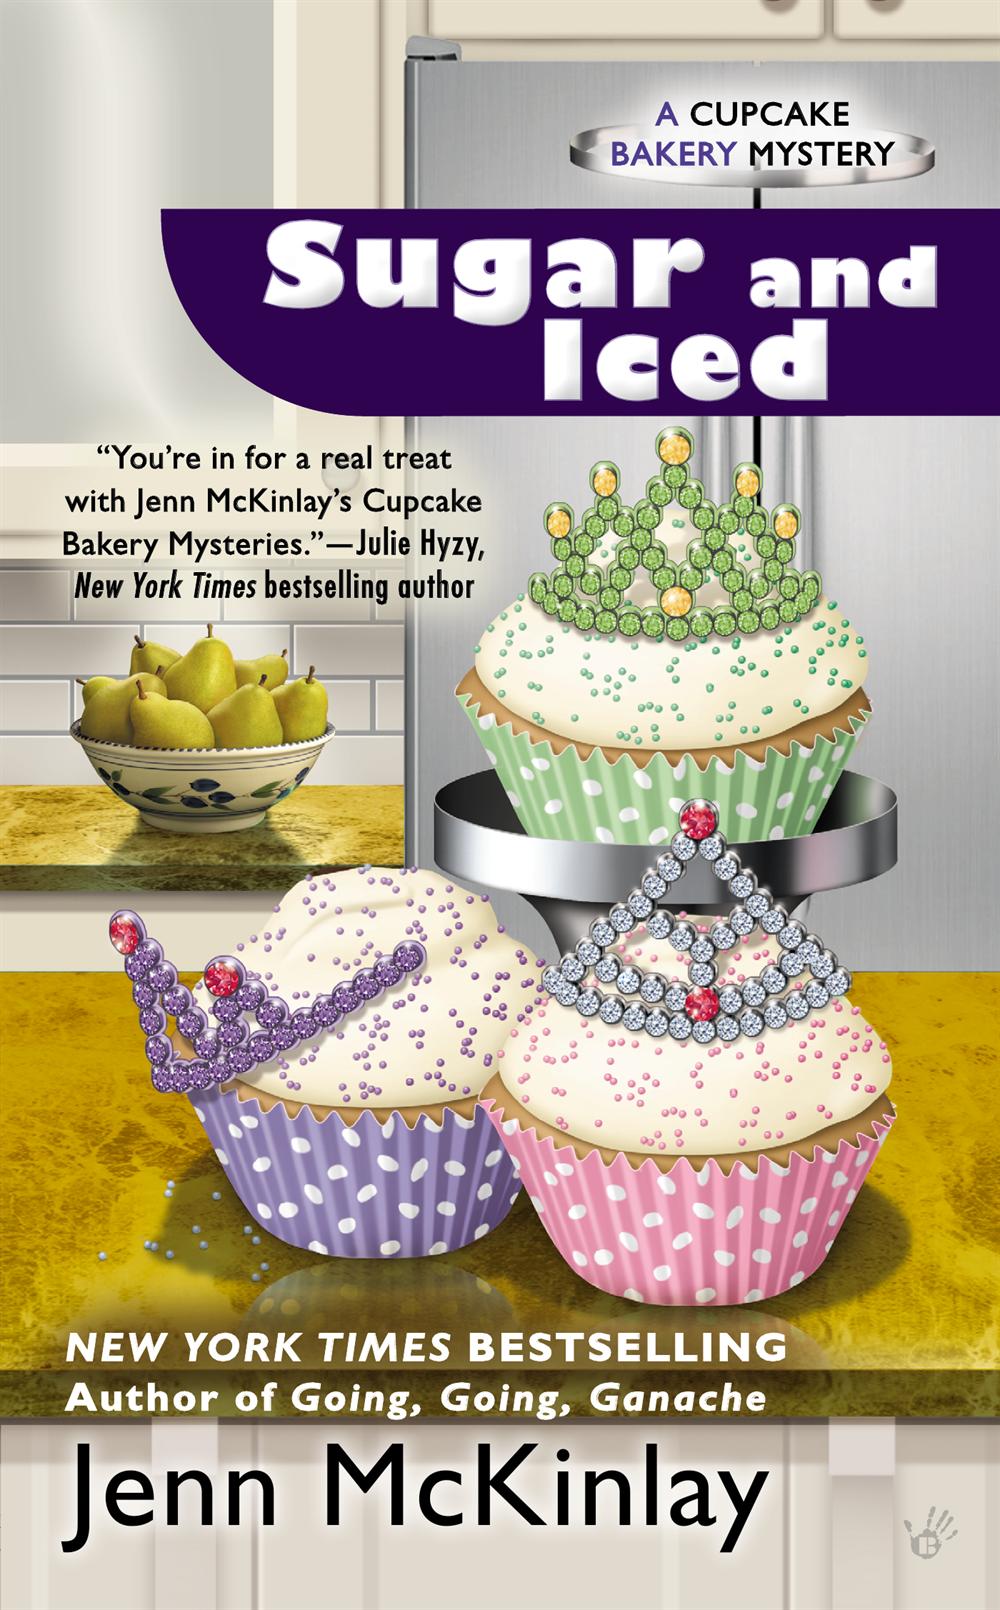 Sugar and Iced: A Cupcake Bakery Mystery